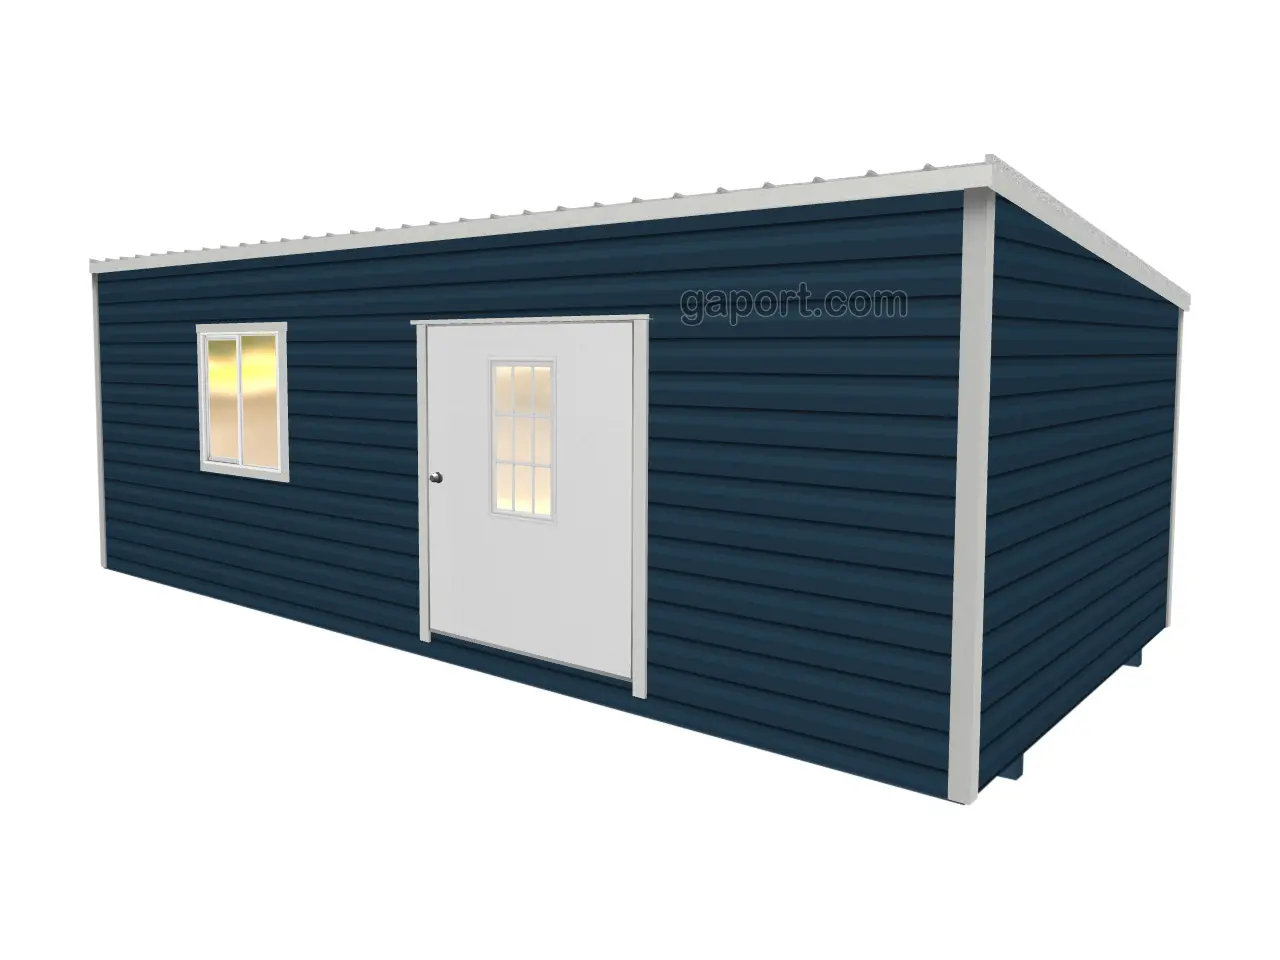 Modern style office sheds give you the privacy you need to work from home with single-slope roof.